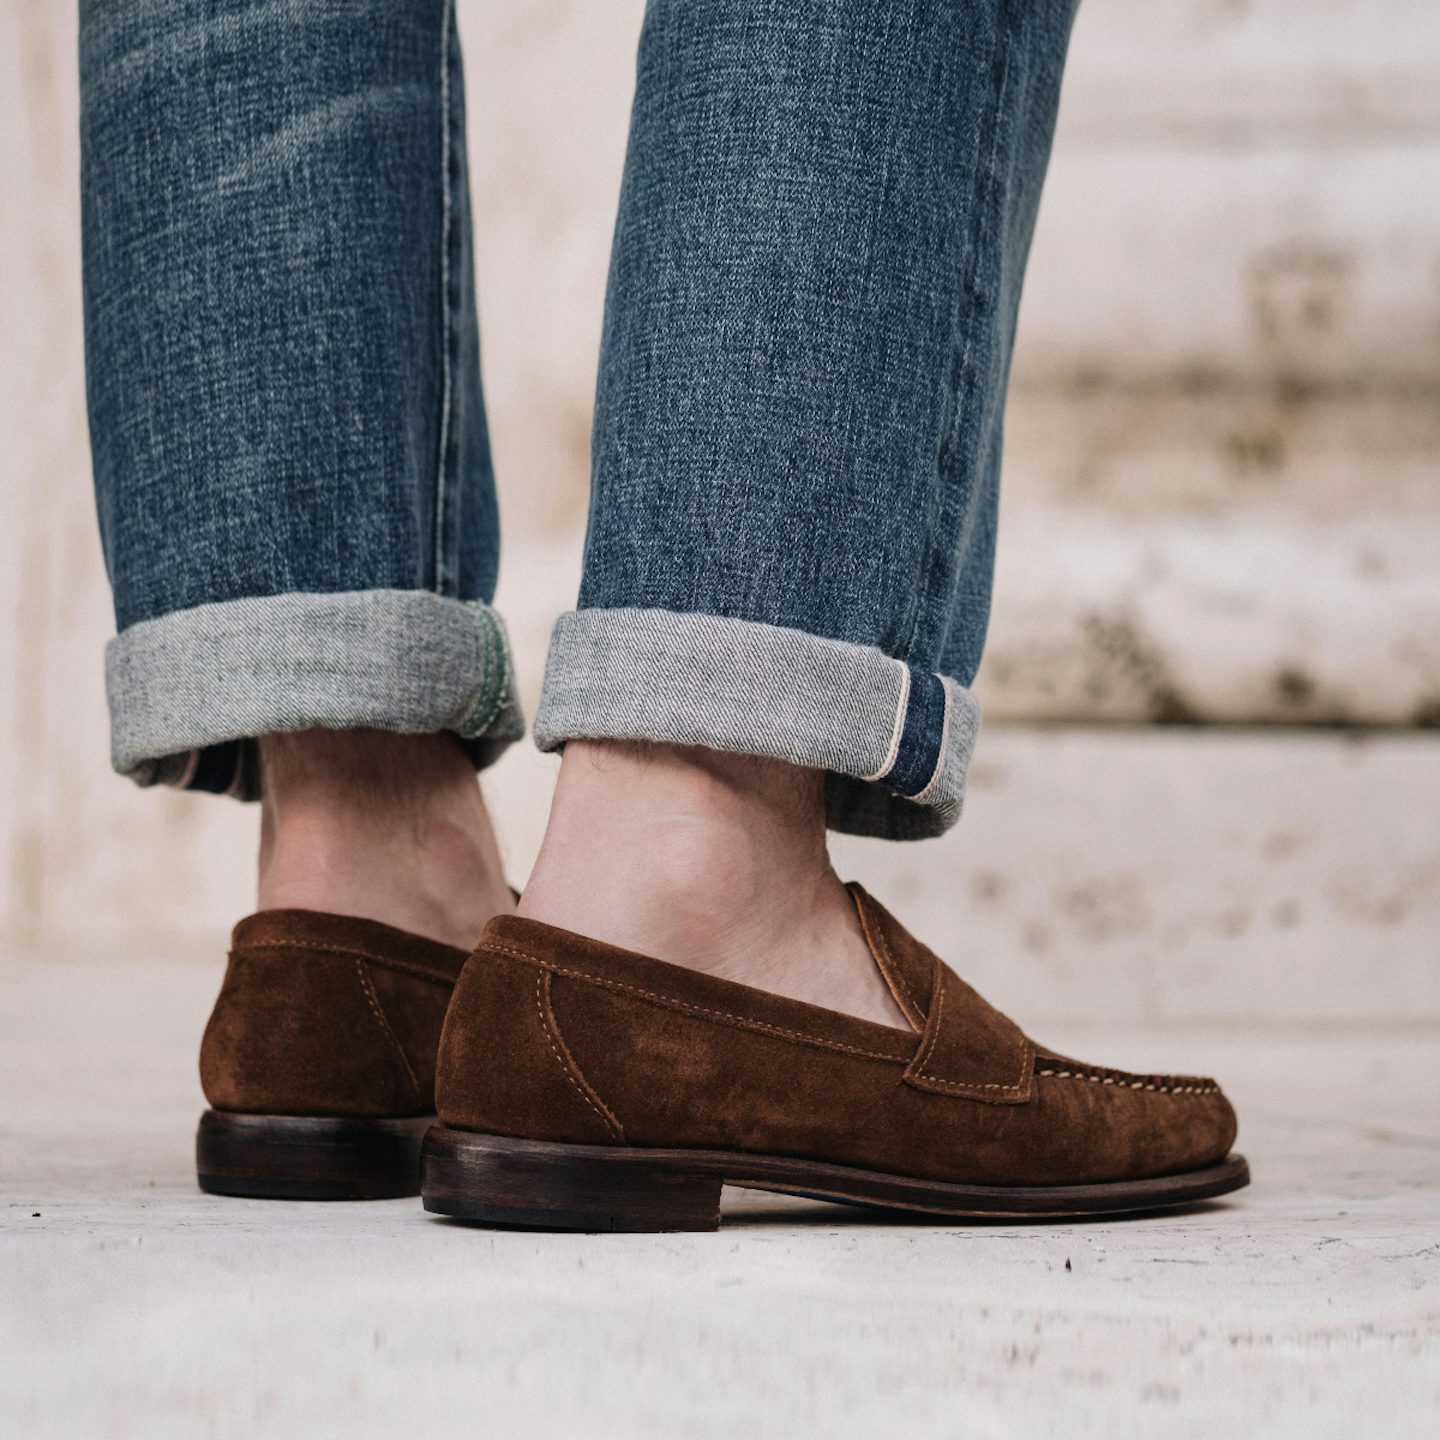 Penny Loafer - Snuff Repello Suede, Leather Sole with Dovetail